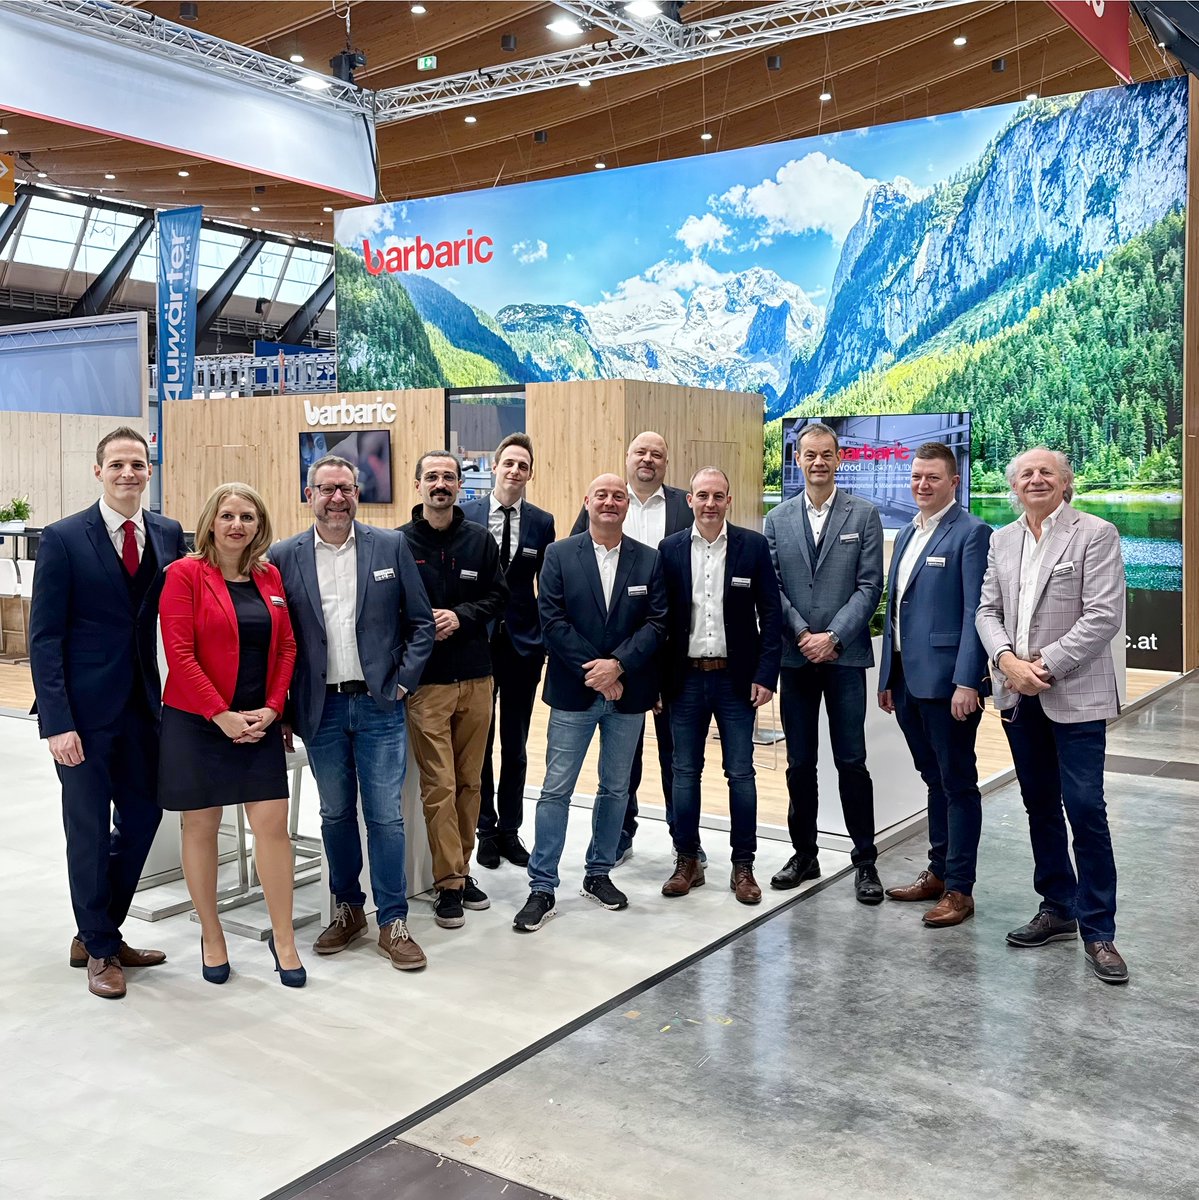 🙌 Our #BarbaricDreamTeam welcomes you to our booth 511 at 'Dach + Holz International' 2024 in Stuttgart.

#barbaric #ideasthatmove #dachholz2024